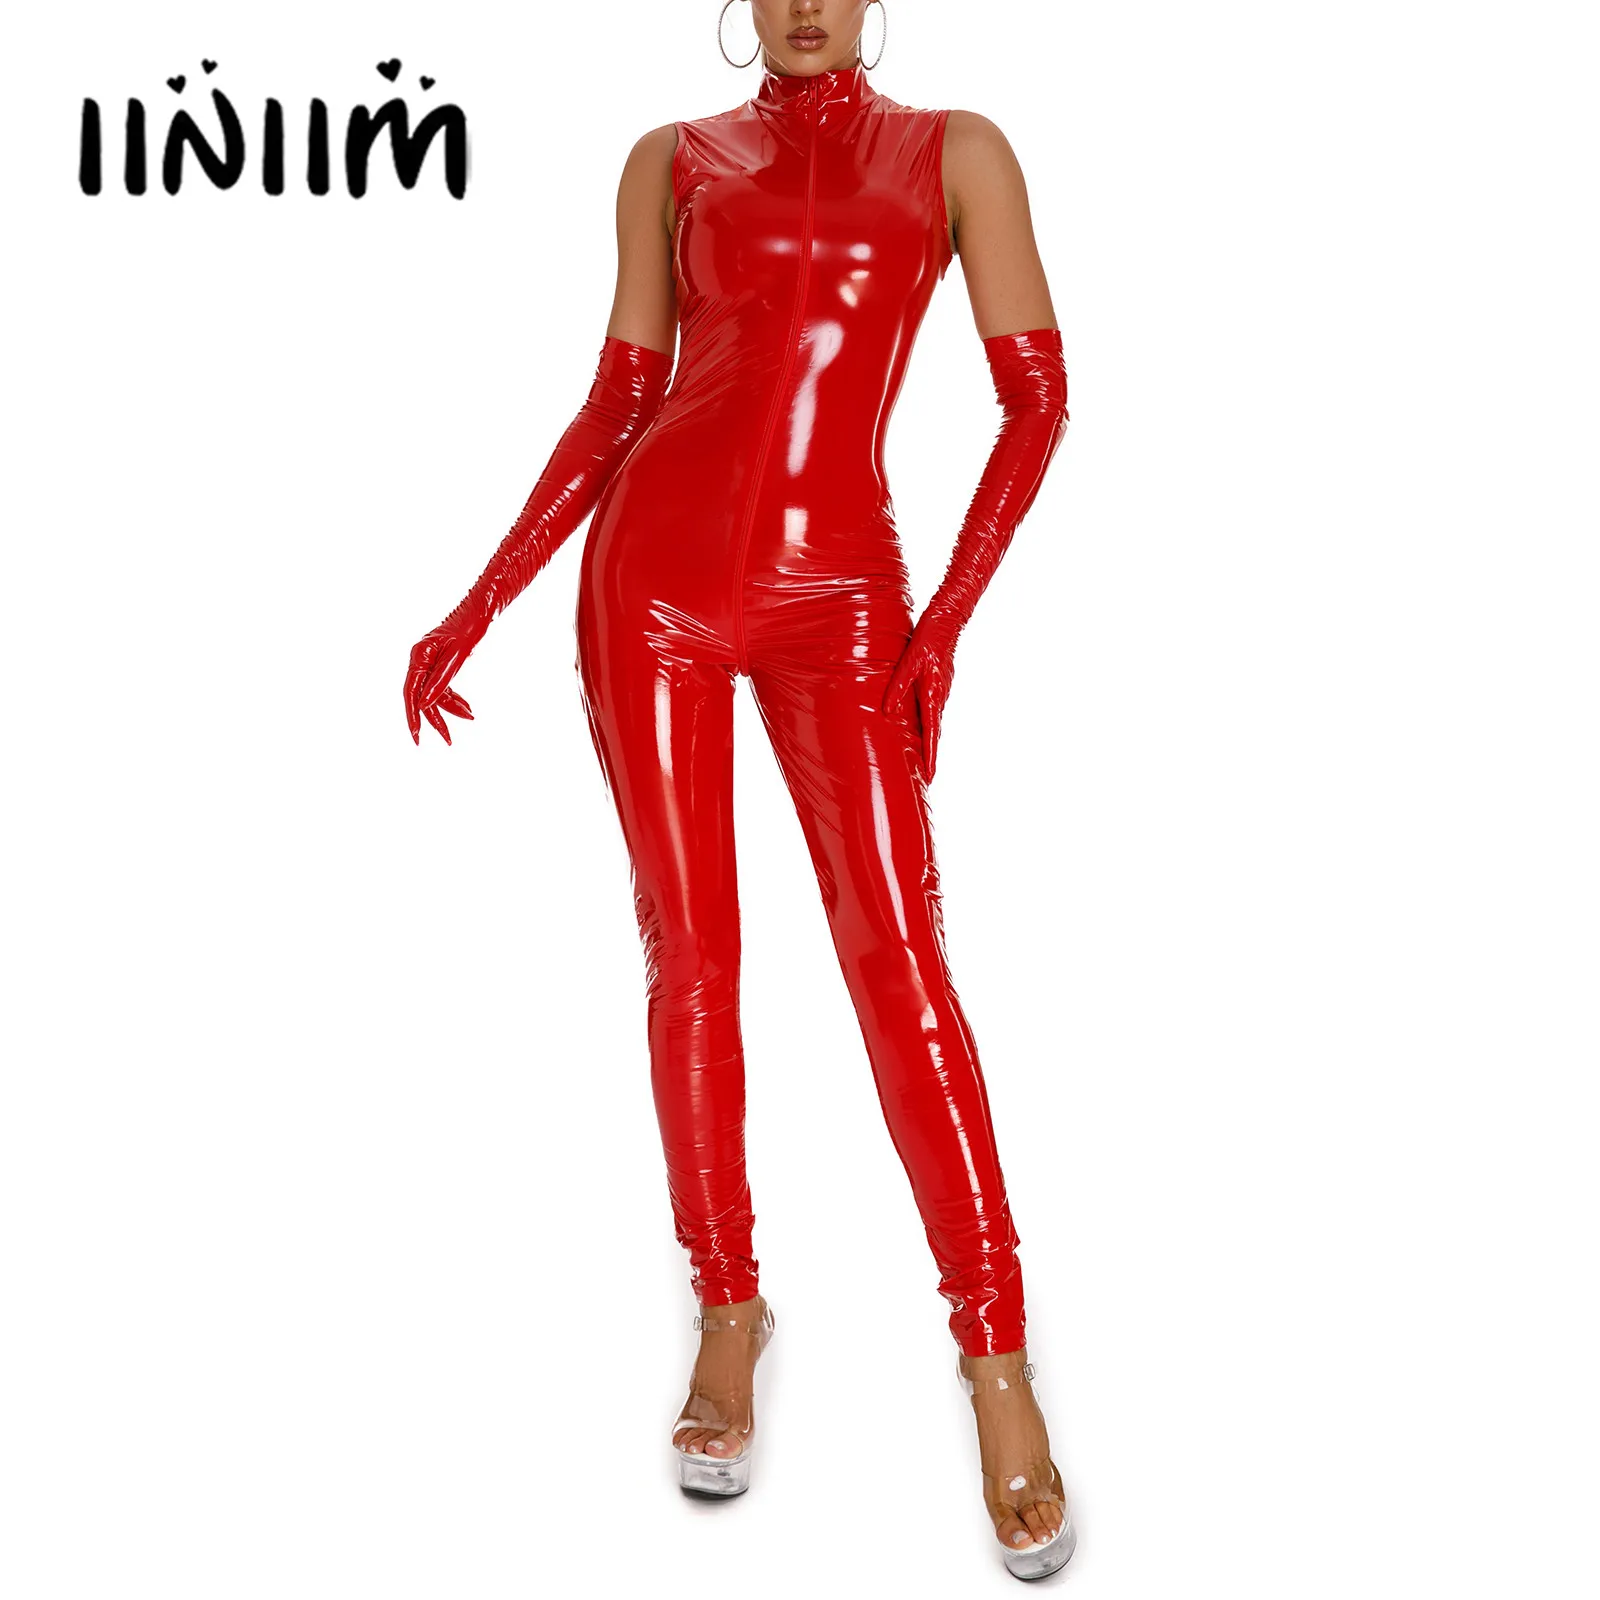 

Womens Patent Leather Skinny Jumpsuit Zipper Crotch Sleeveless Bodysuit Pole Dance Rave Clubwear Wet Look Stand Collar Catsuit